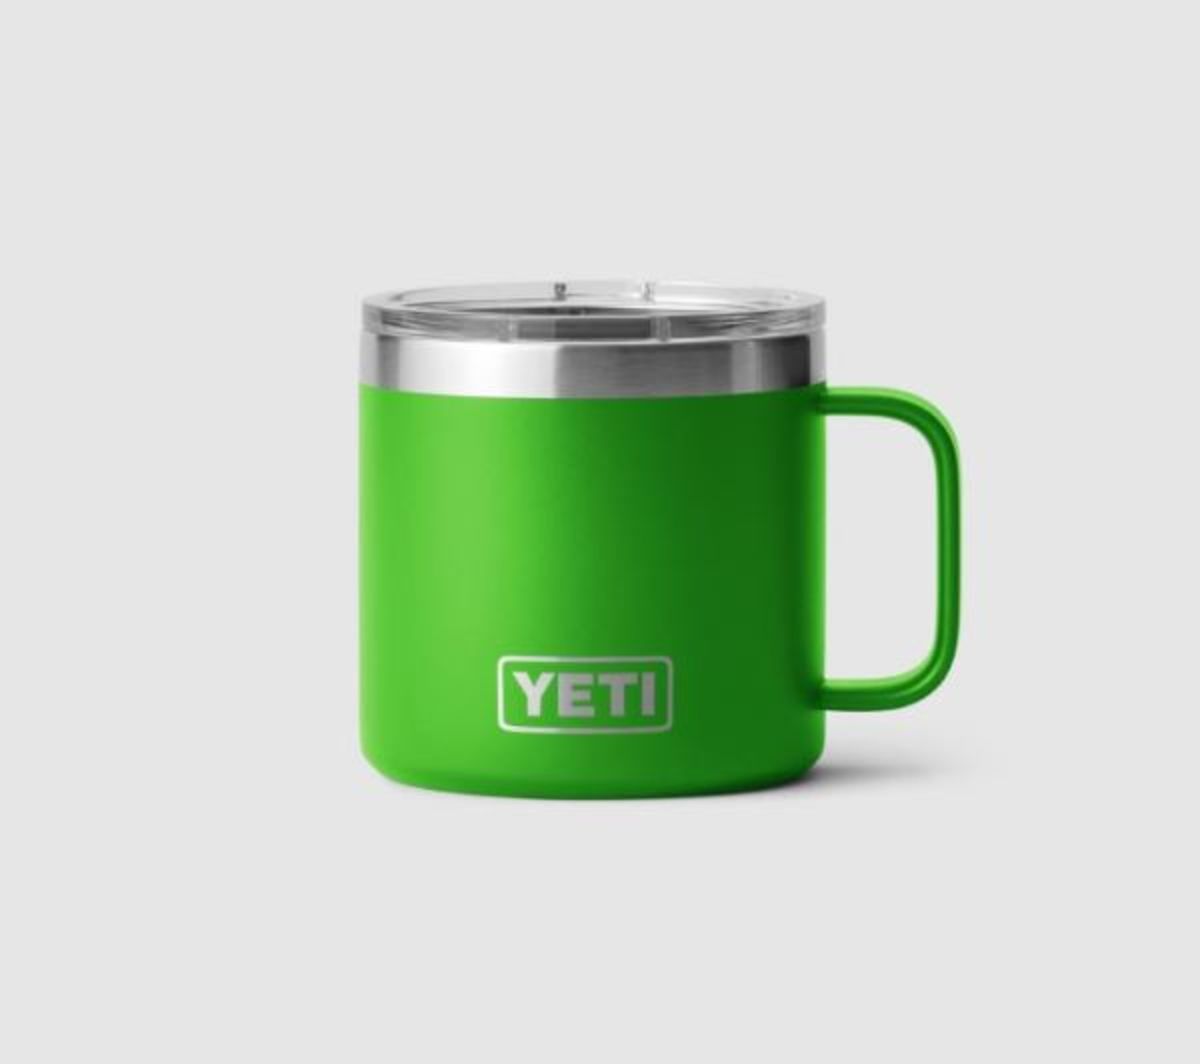 Yeti Is Having a Rare Sale on Its Shopper-Loved Rambler Mugs, and